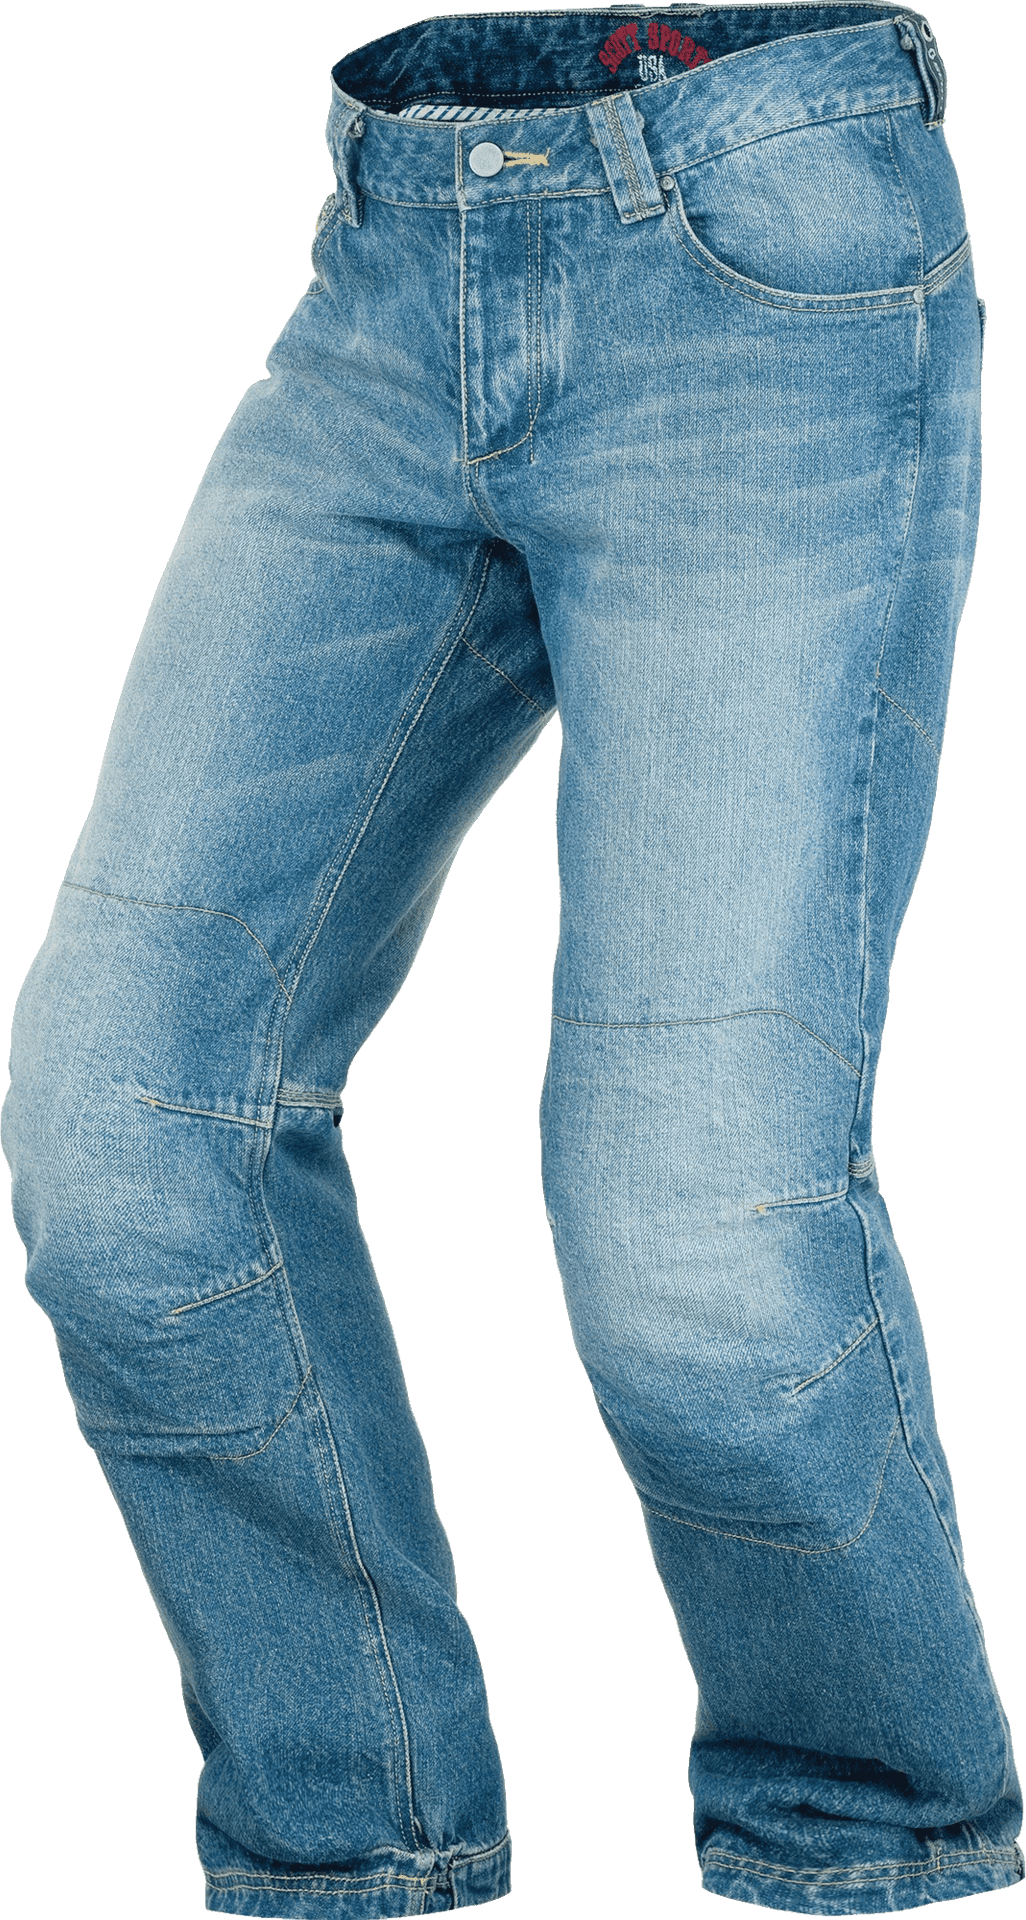 Blue Denim Jeans Standing Isolated PNG